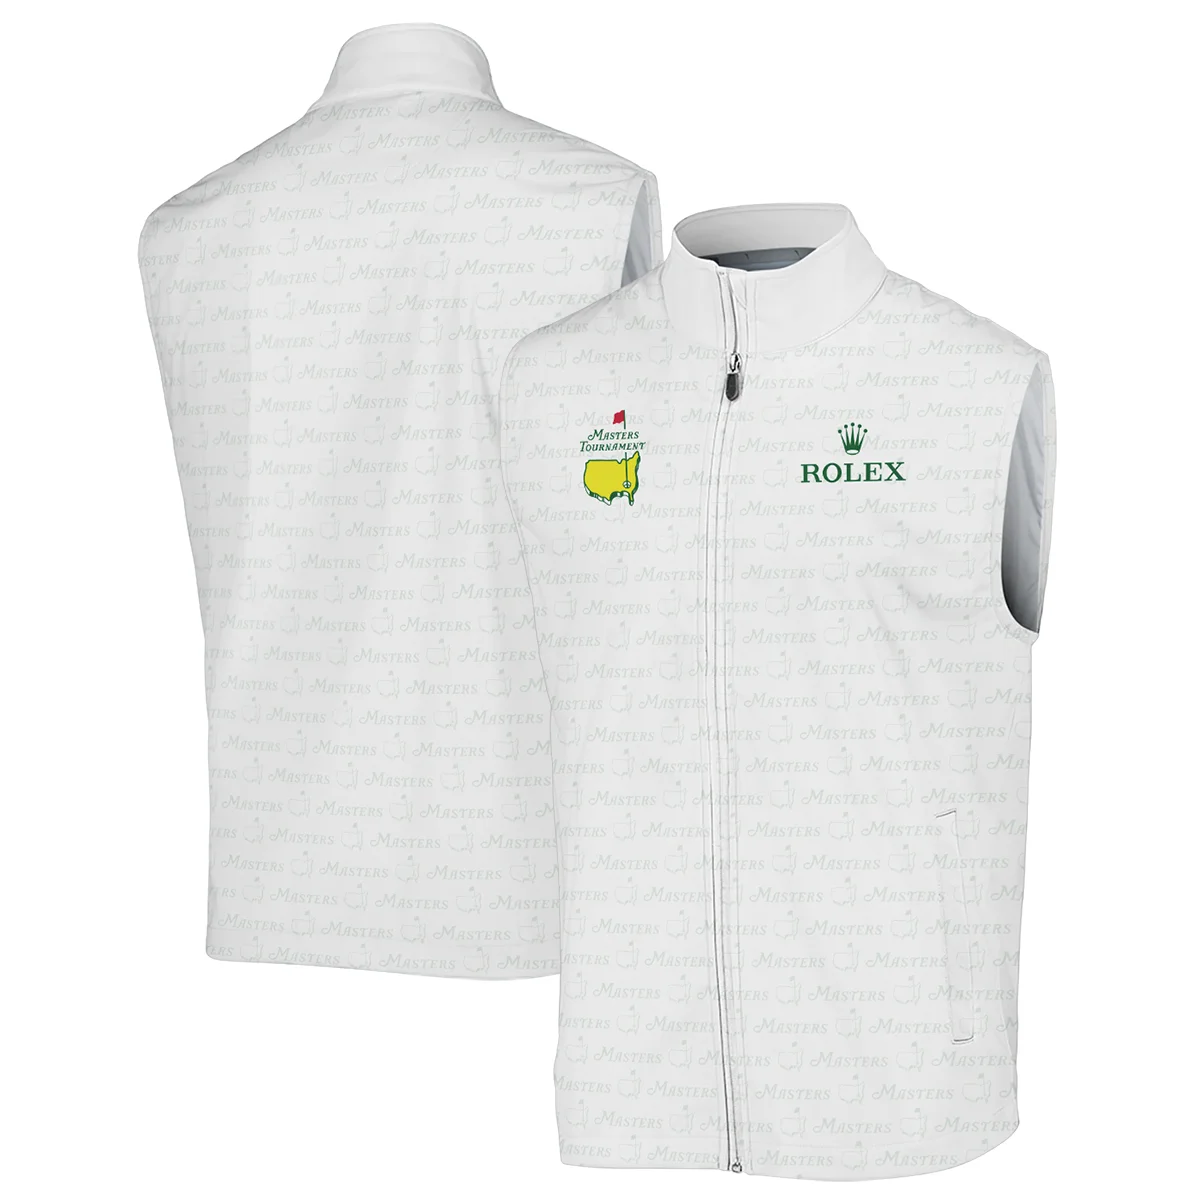 Golf Pattern Cup White Mix Green Masters Tournament Rolex Vneck Polo Shirt Style Classic Polo Shirt For Men